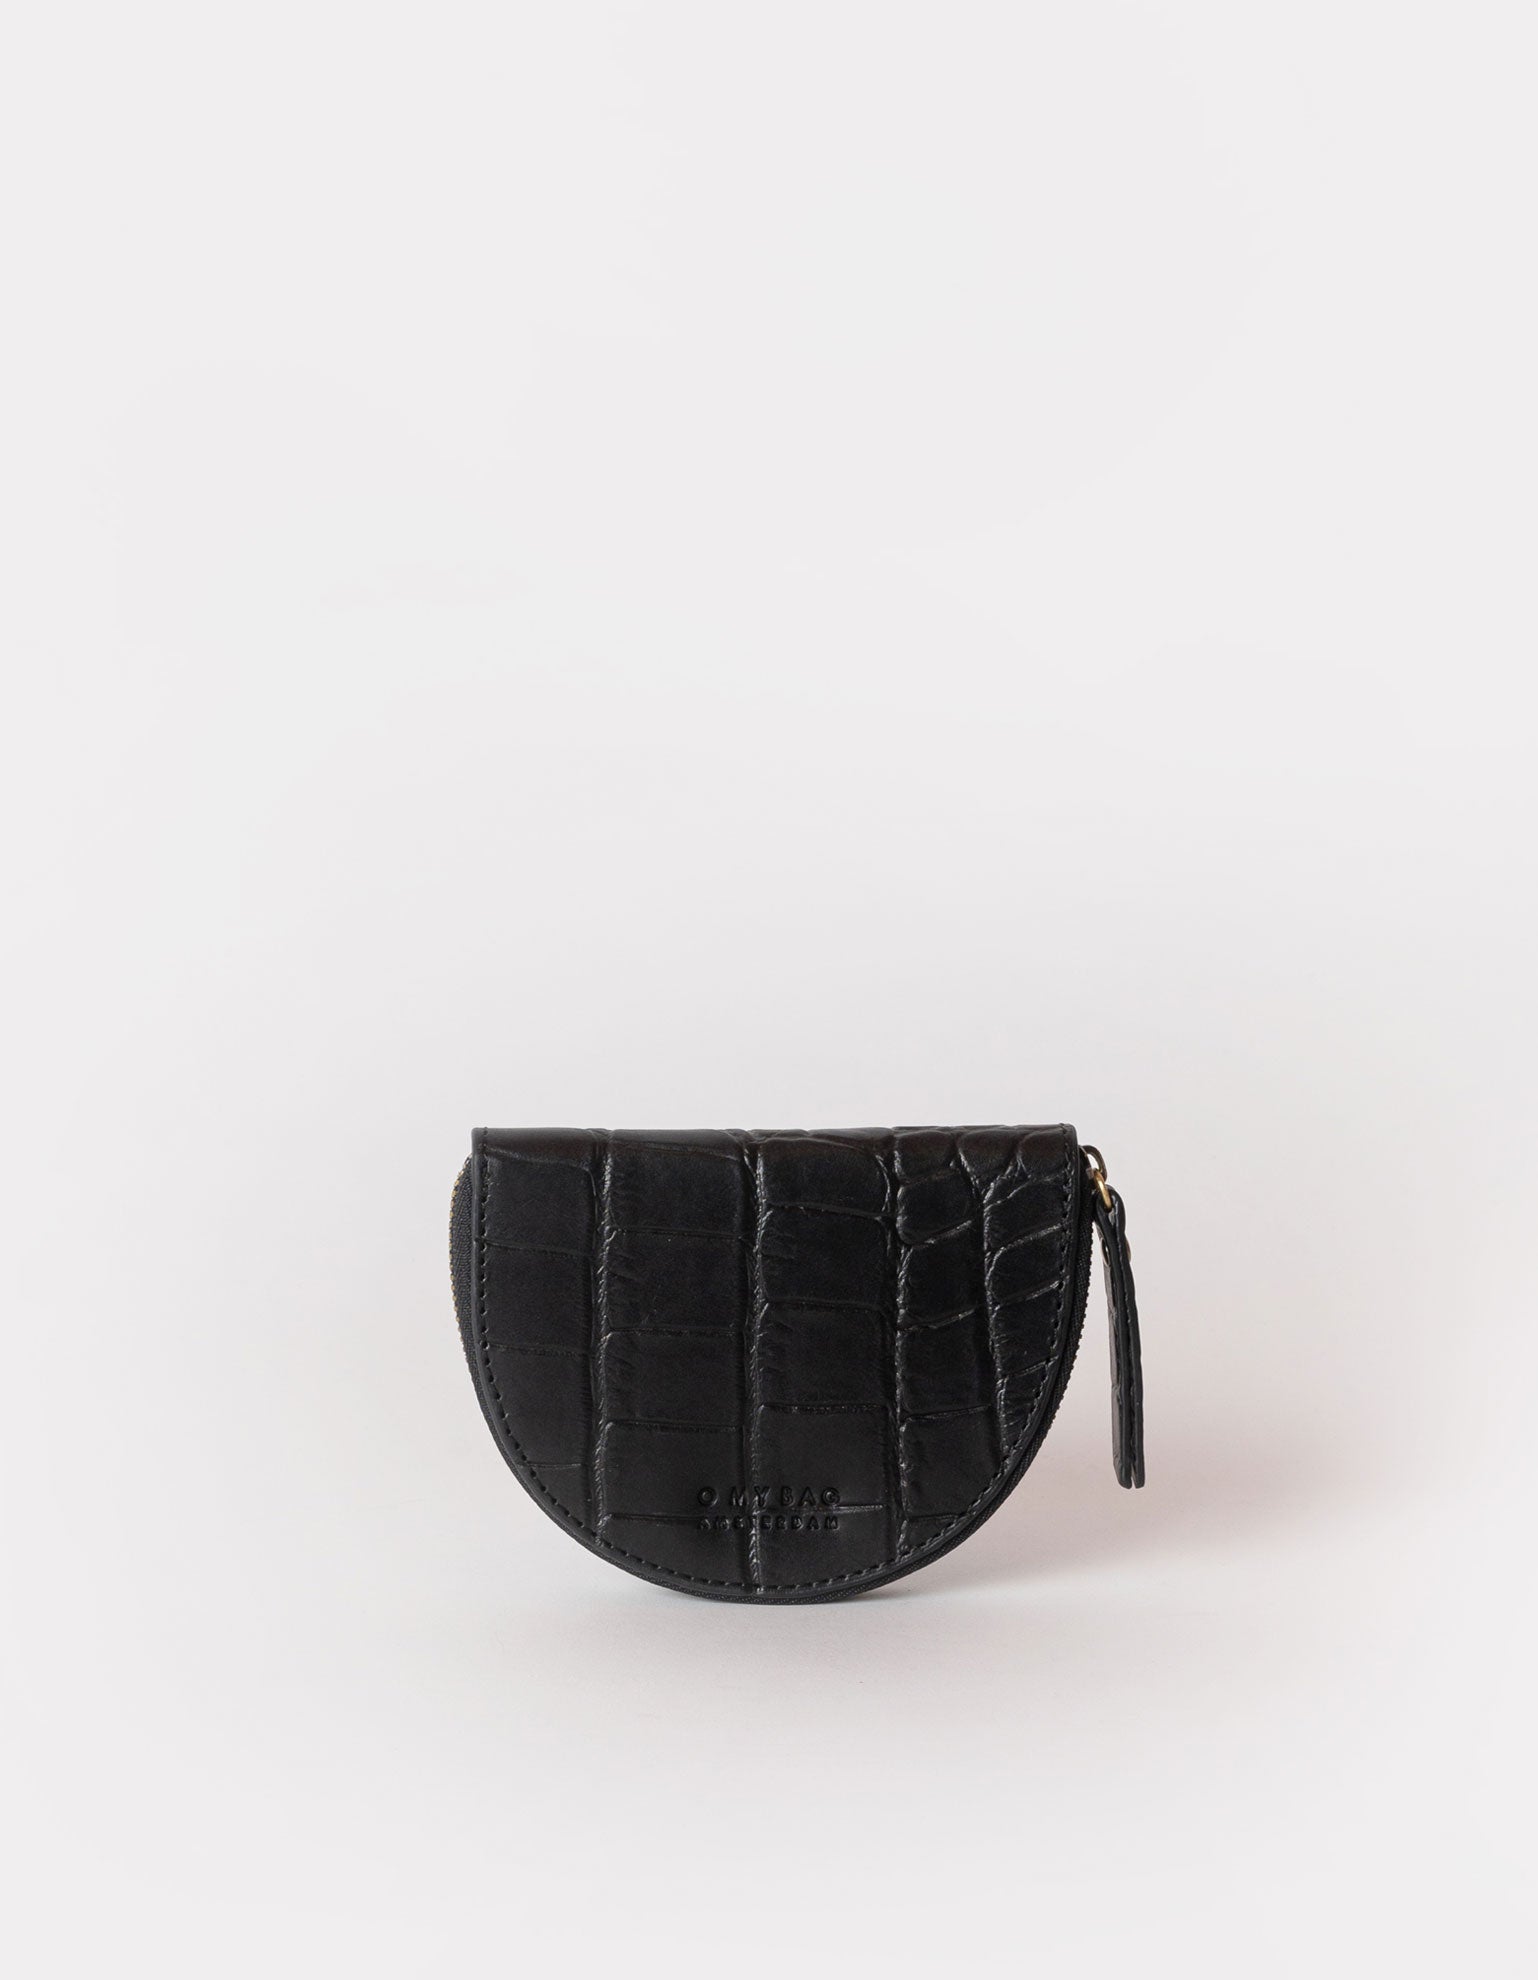 Laura Purse Black Classic Croco Leather. Round moon shape coin purse unisex wallet. Front product image.